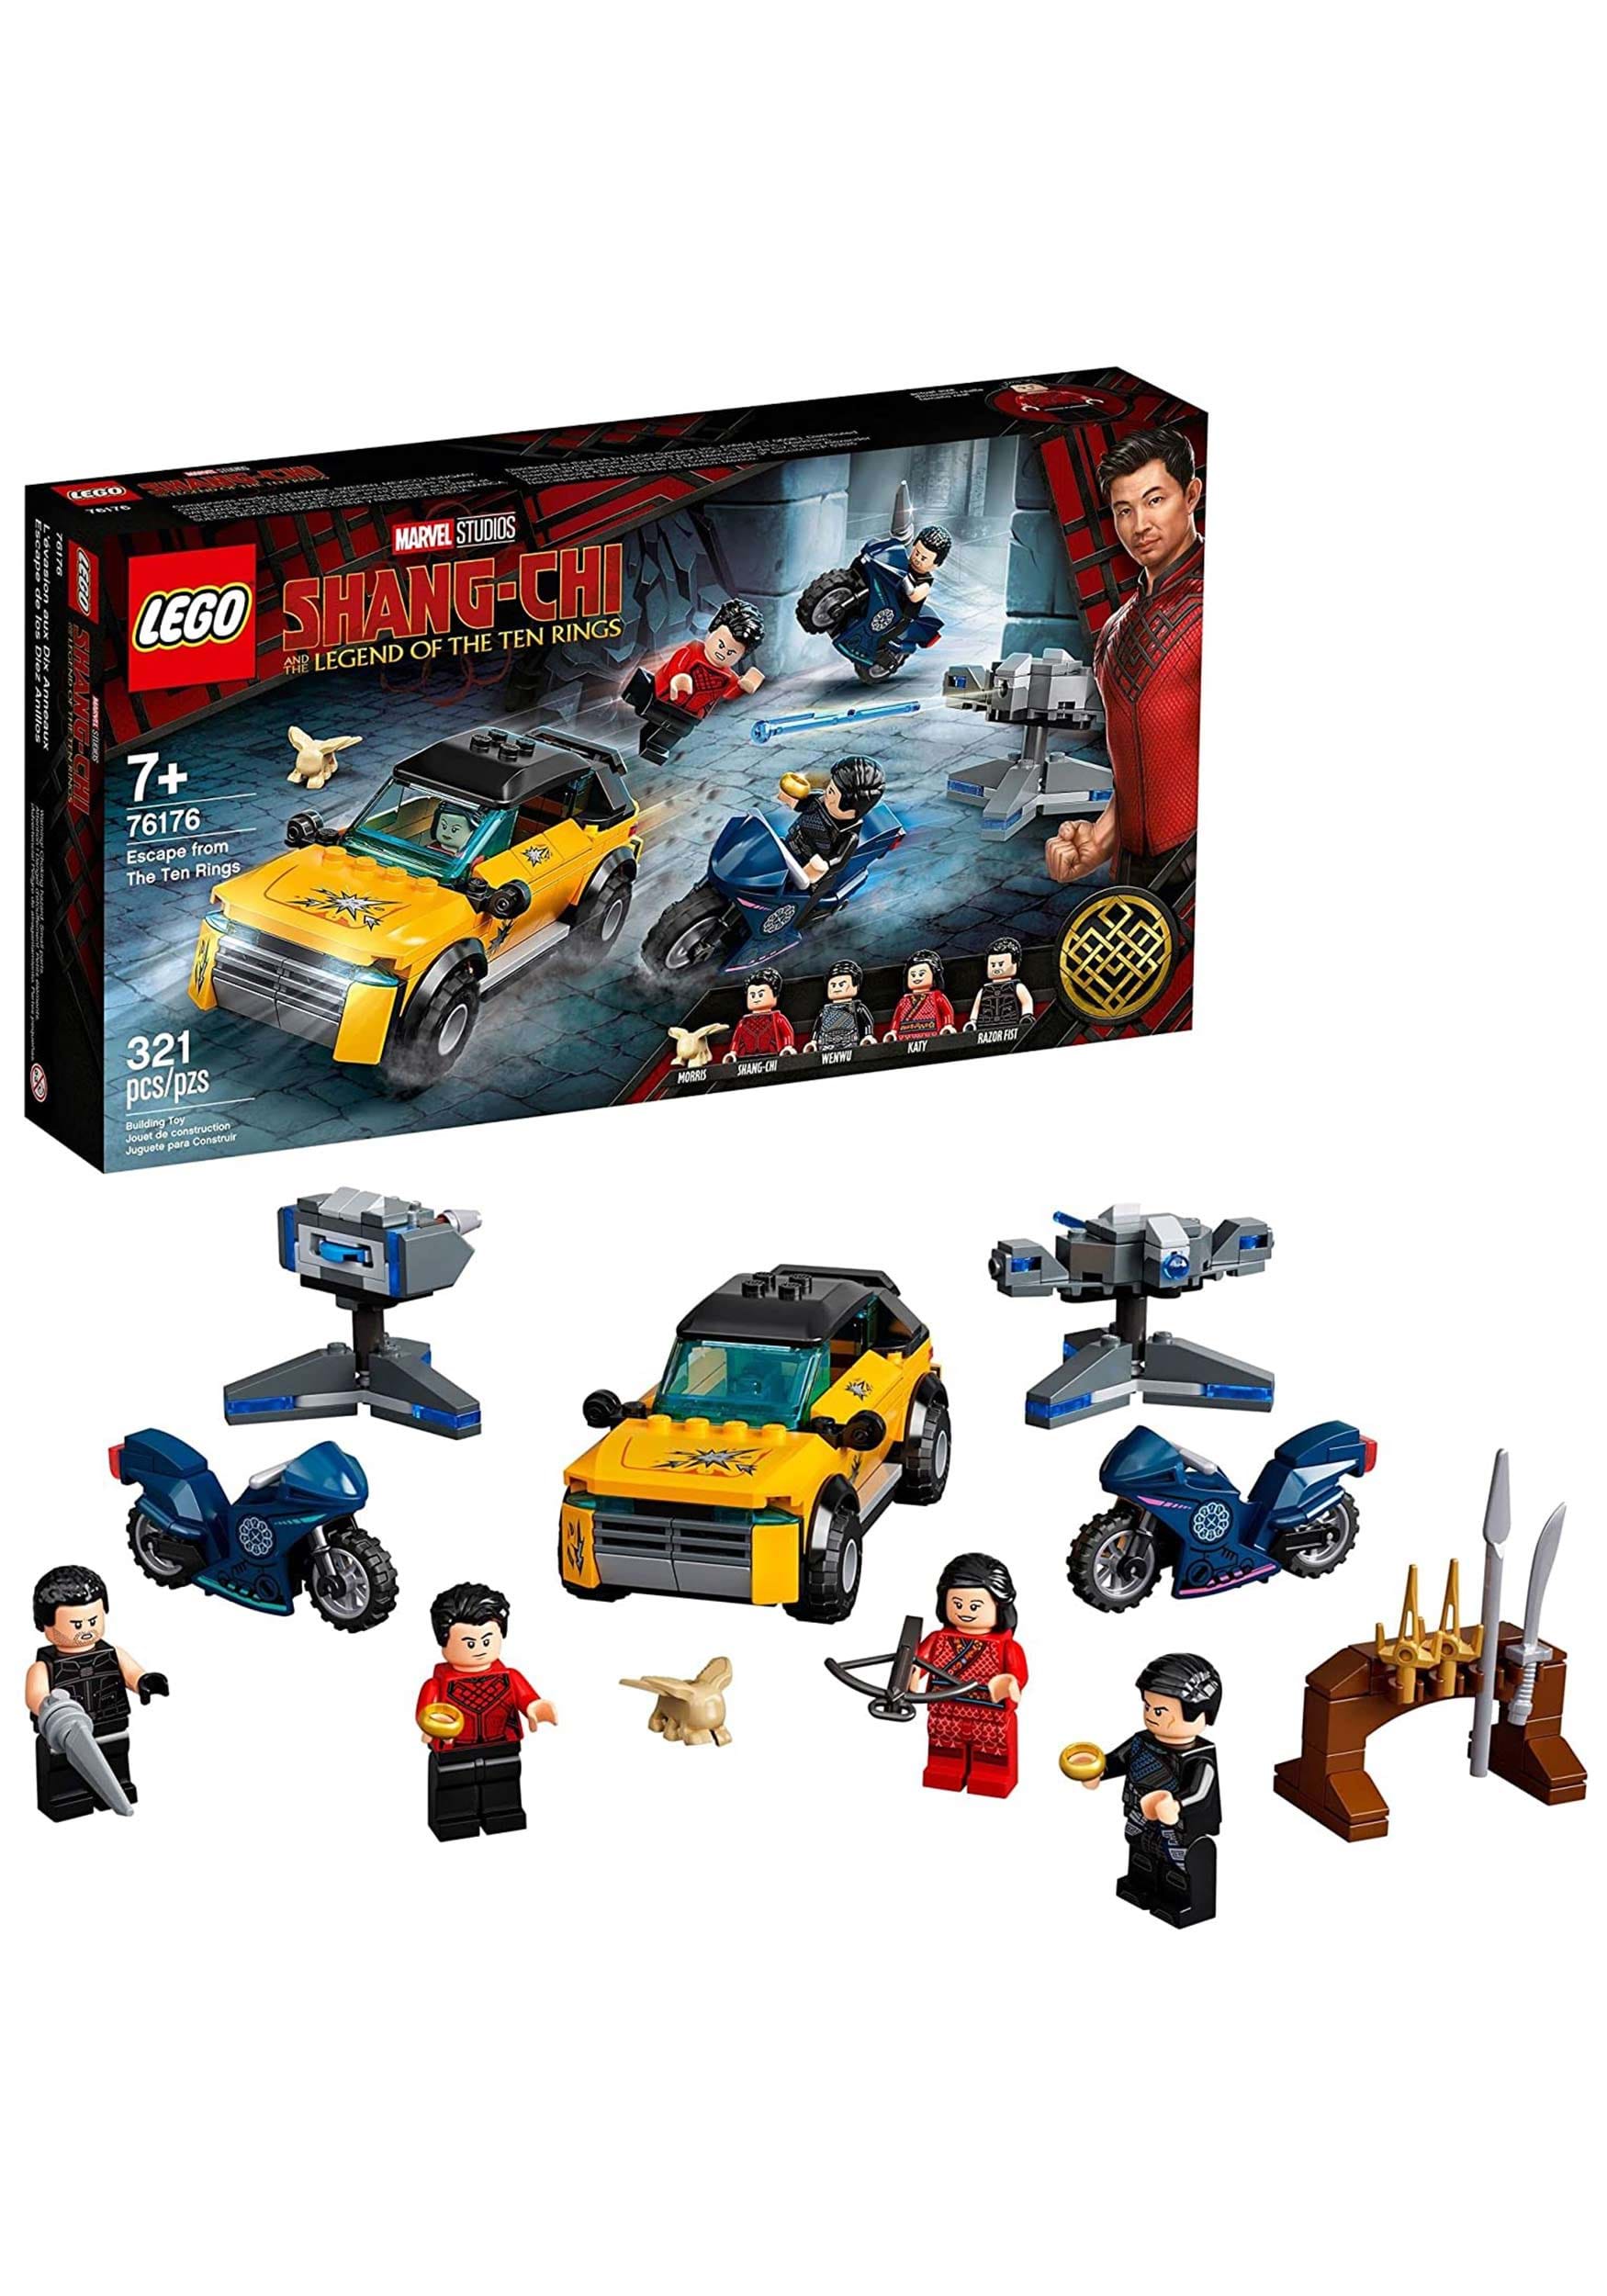 LEGO Shang-Chi Legend of the Ten Rings Escape From the Ten Rings Building Set